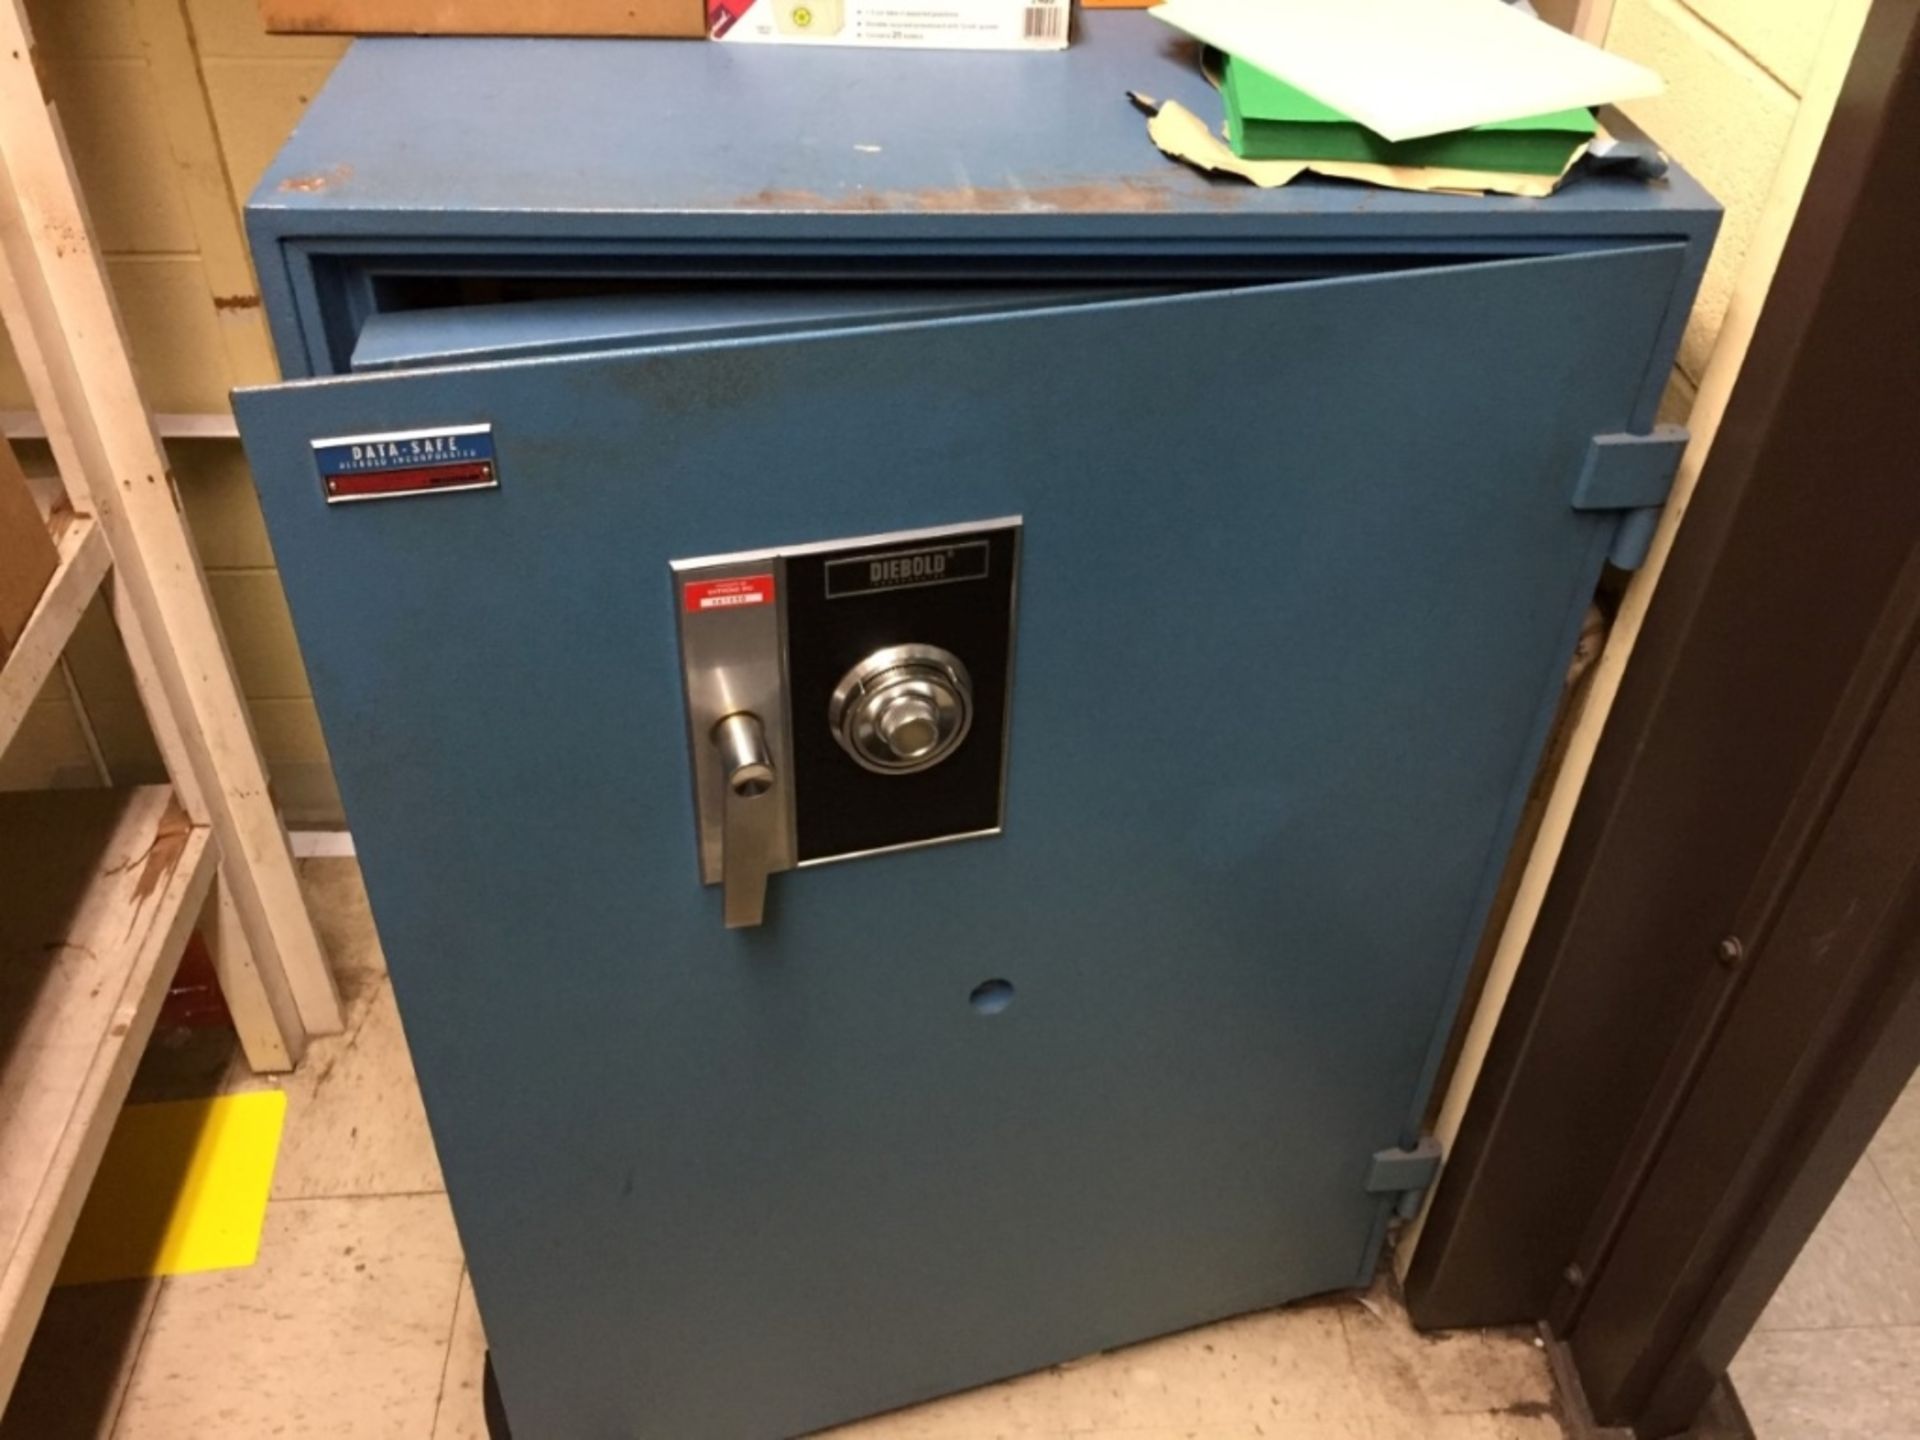 Diebold Fire Data Safe, Model R-5425, S/N A580738 (NOTE: Combination Not Available), LOCATED IN